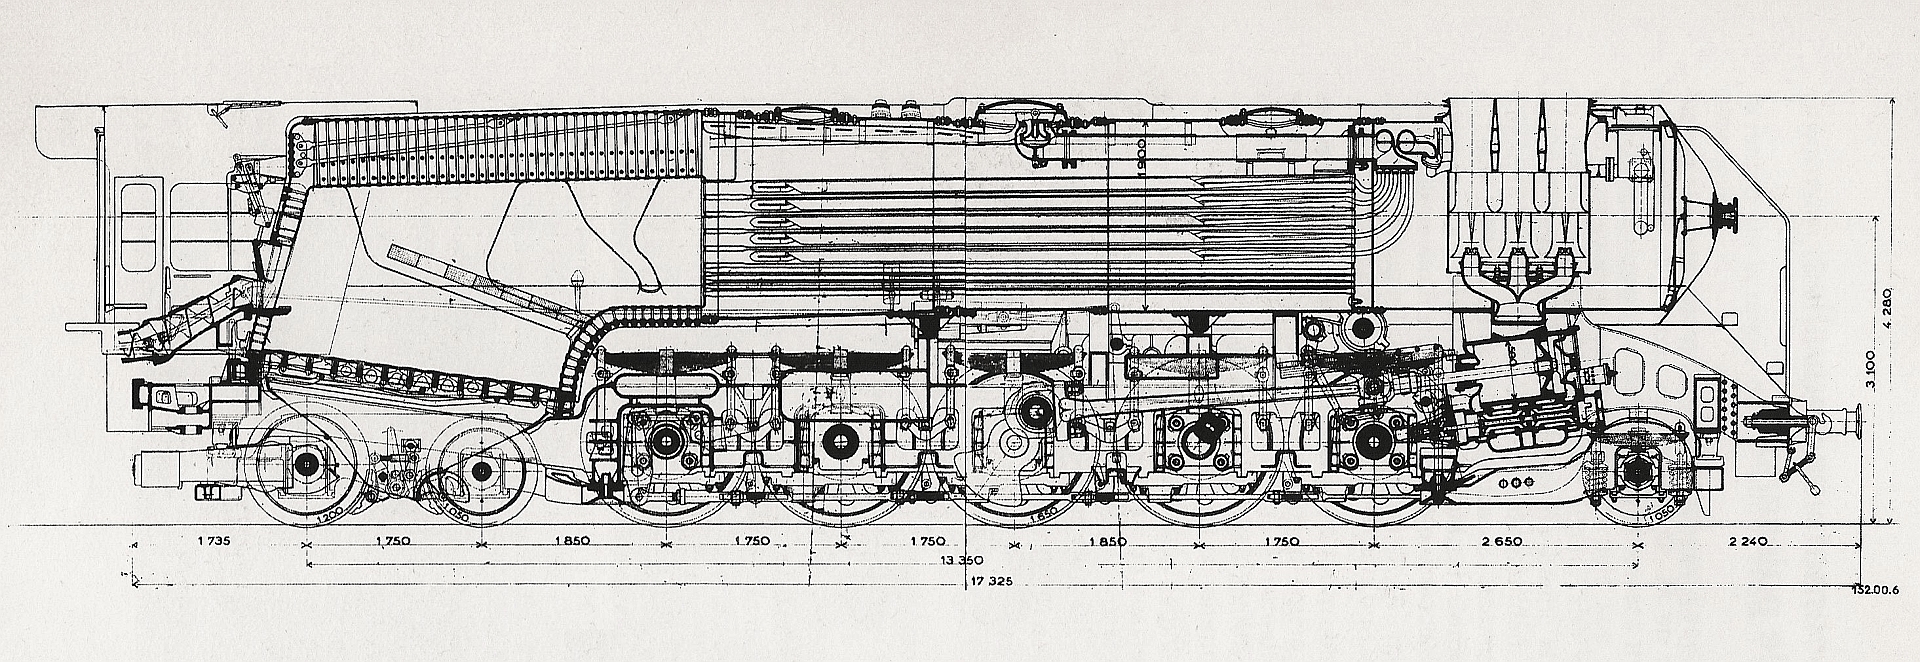 Although the locomotive may look conventional from the outside this design for a 2-10-4 "Selkirk" provides 6000hp from a fire grate area of 65 sq ft. By comparison an American Atchison, Topeka and Santa Fe 2-10-4 with 121 sq ft of grate area produced 6100hp. Chapelon's refinements were all about getting more from less, just like a car engine tuner. (Picture courtesy Wikiwand.com).